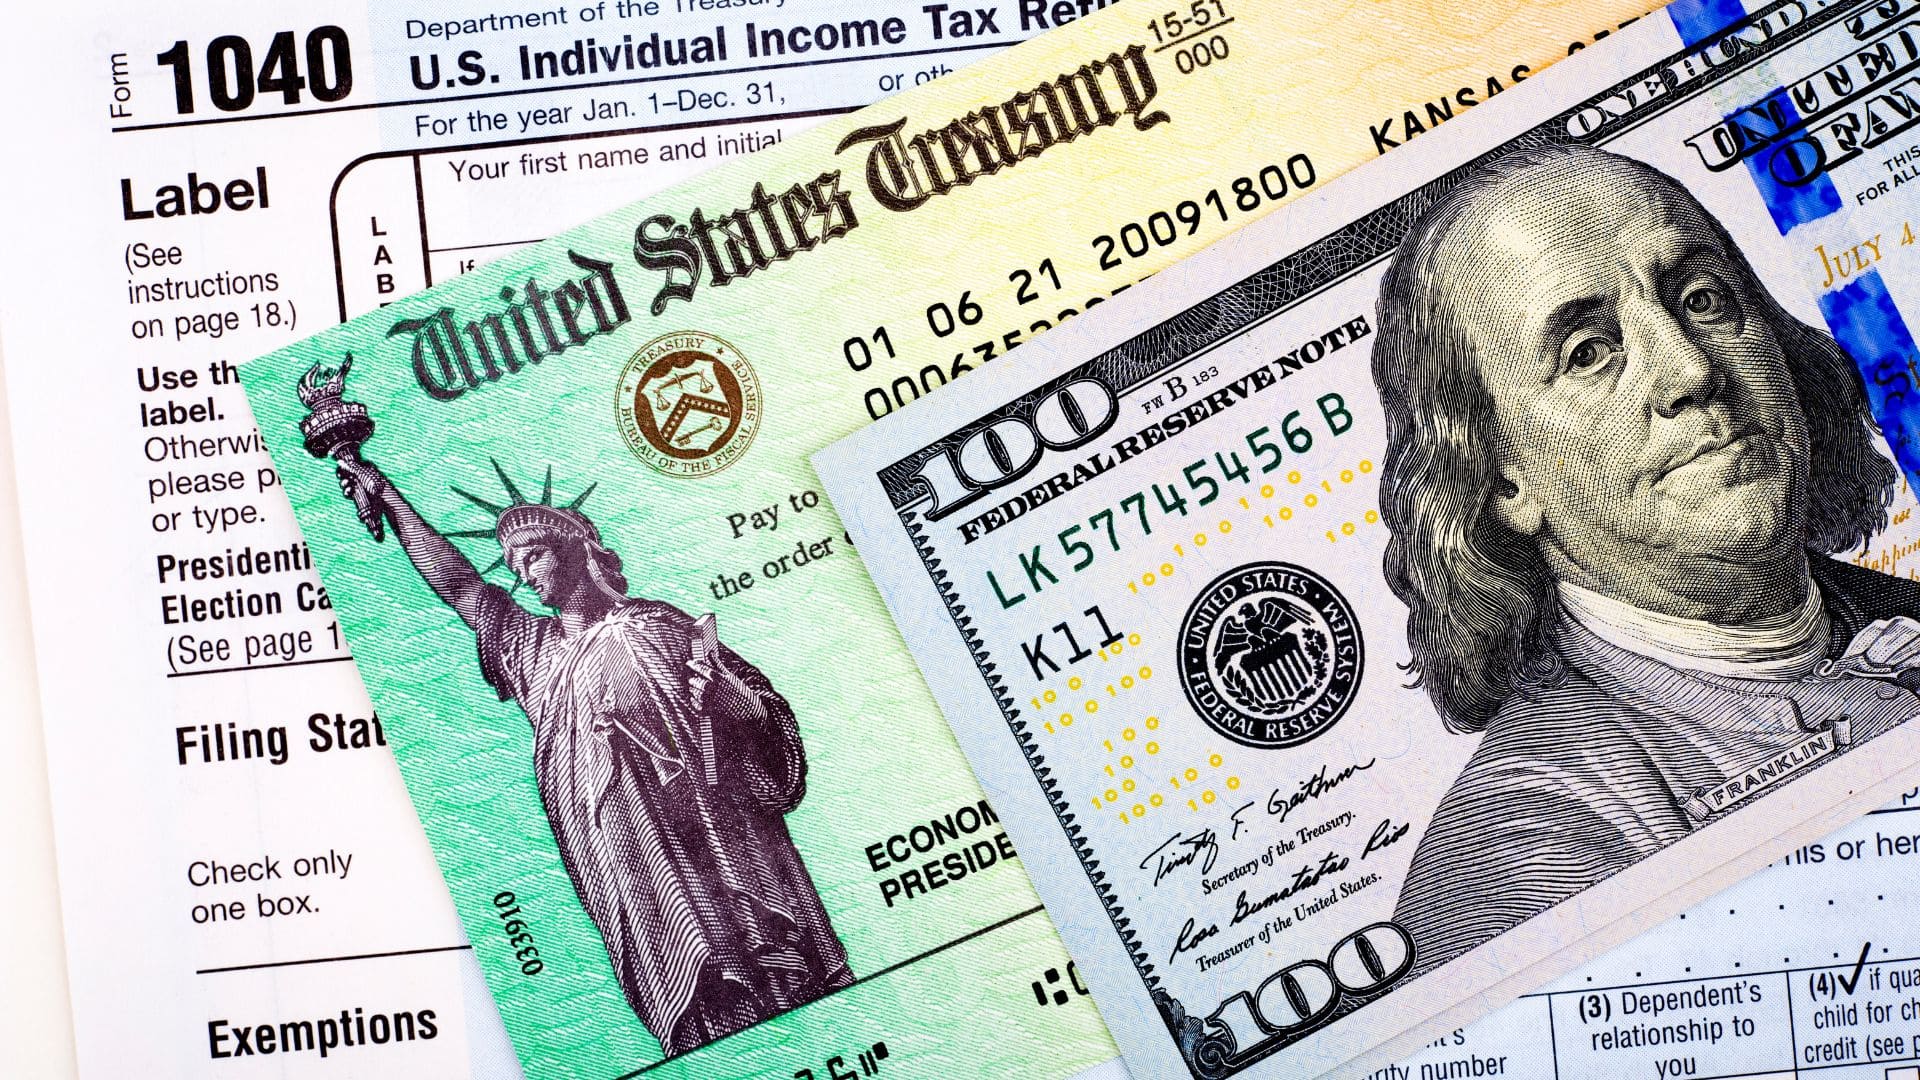 If you live in Minnesota you could have one unclaimed Stimulus check